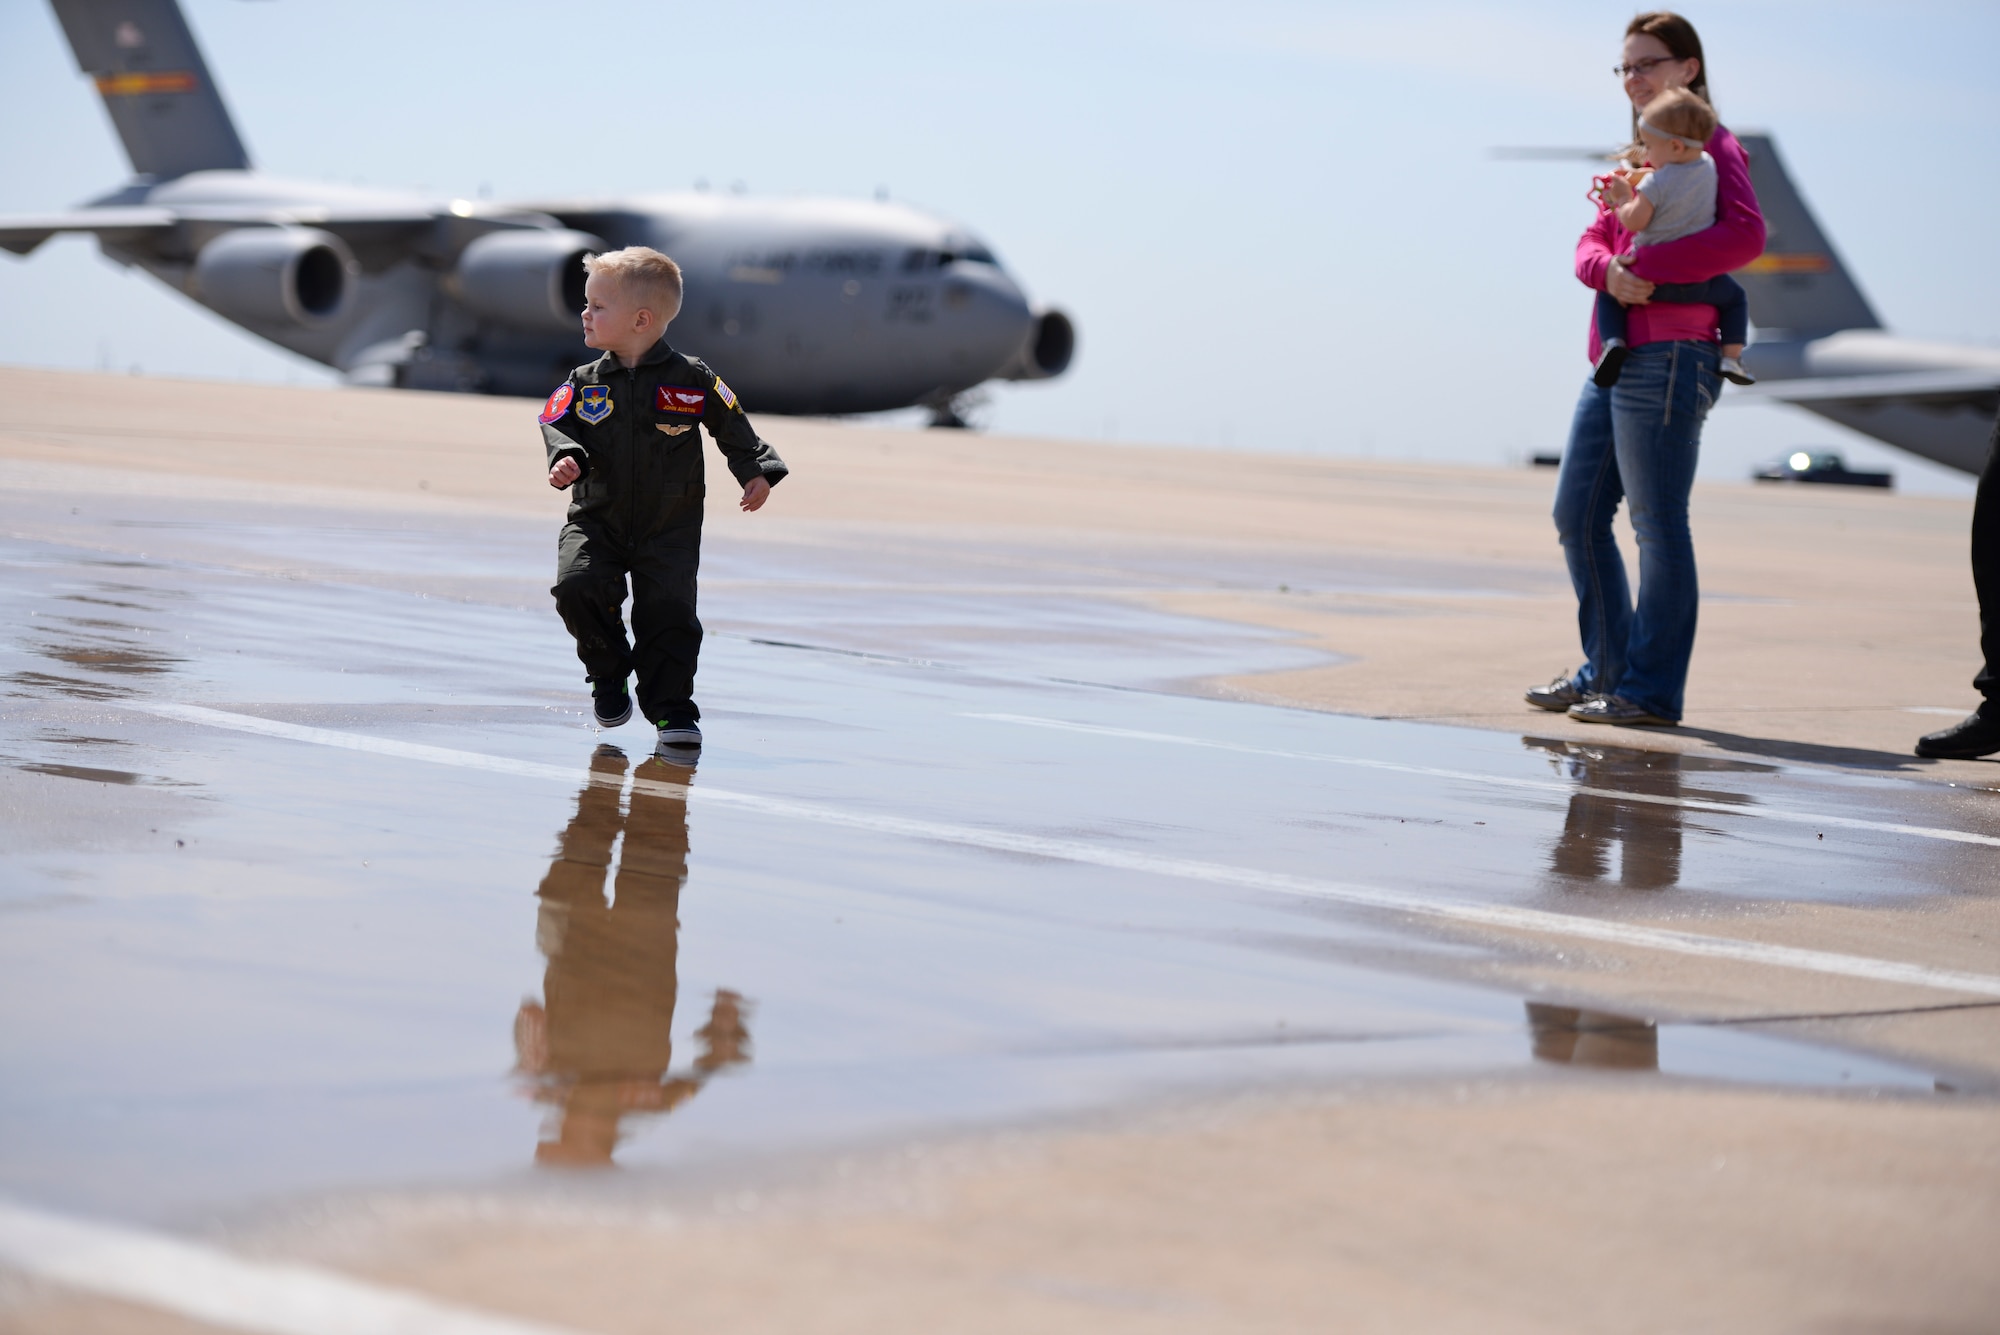 Two-year-old John Austin runs on the flightline during his Pilot for a Day visit May 15, 2014, at Altus Air Force Base, Oklahoma. John was diagnosed with acute lymphoblastic leukemia when he was four months old, and his parents were told that he had a 45 percent chance of surviving to age 5. He has since completed treatment and has been in remission since December 2011. (U.S. Air Force photo/Staff Sgt. Nathanael Callon) 